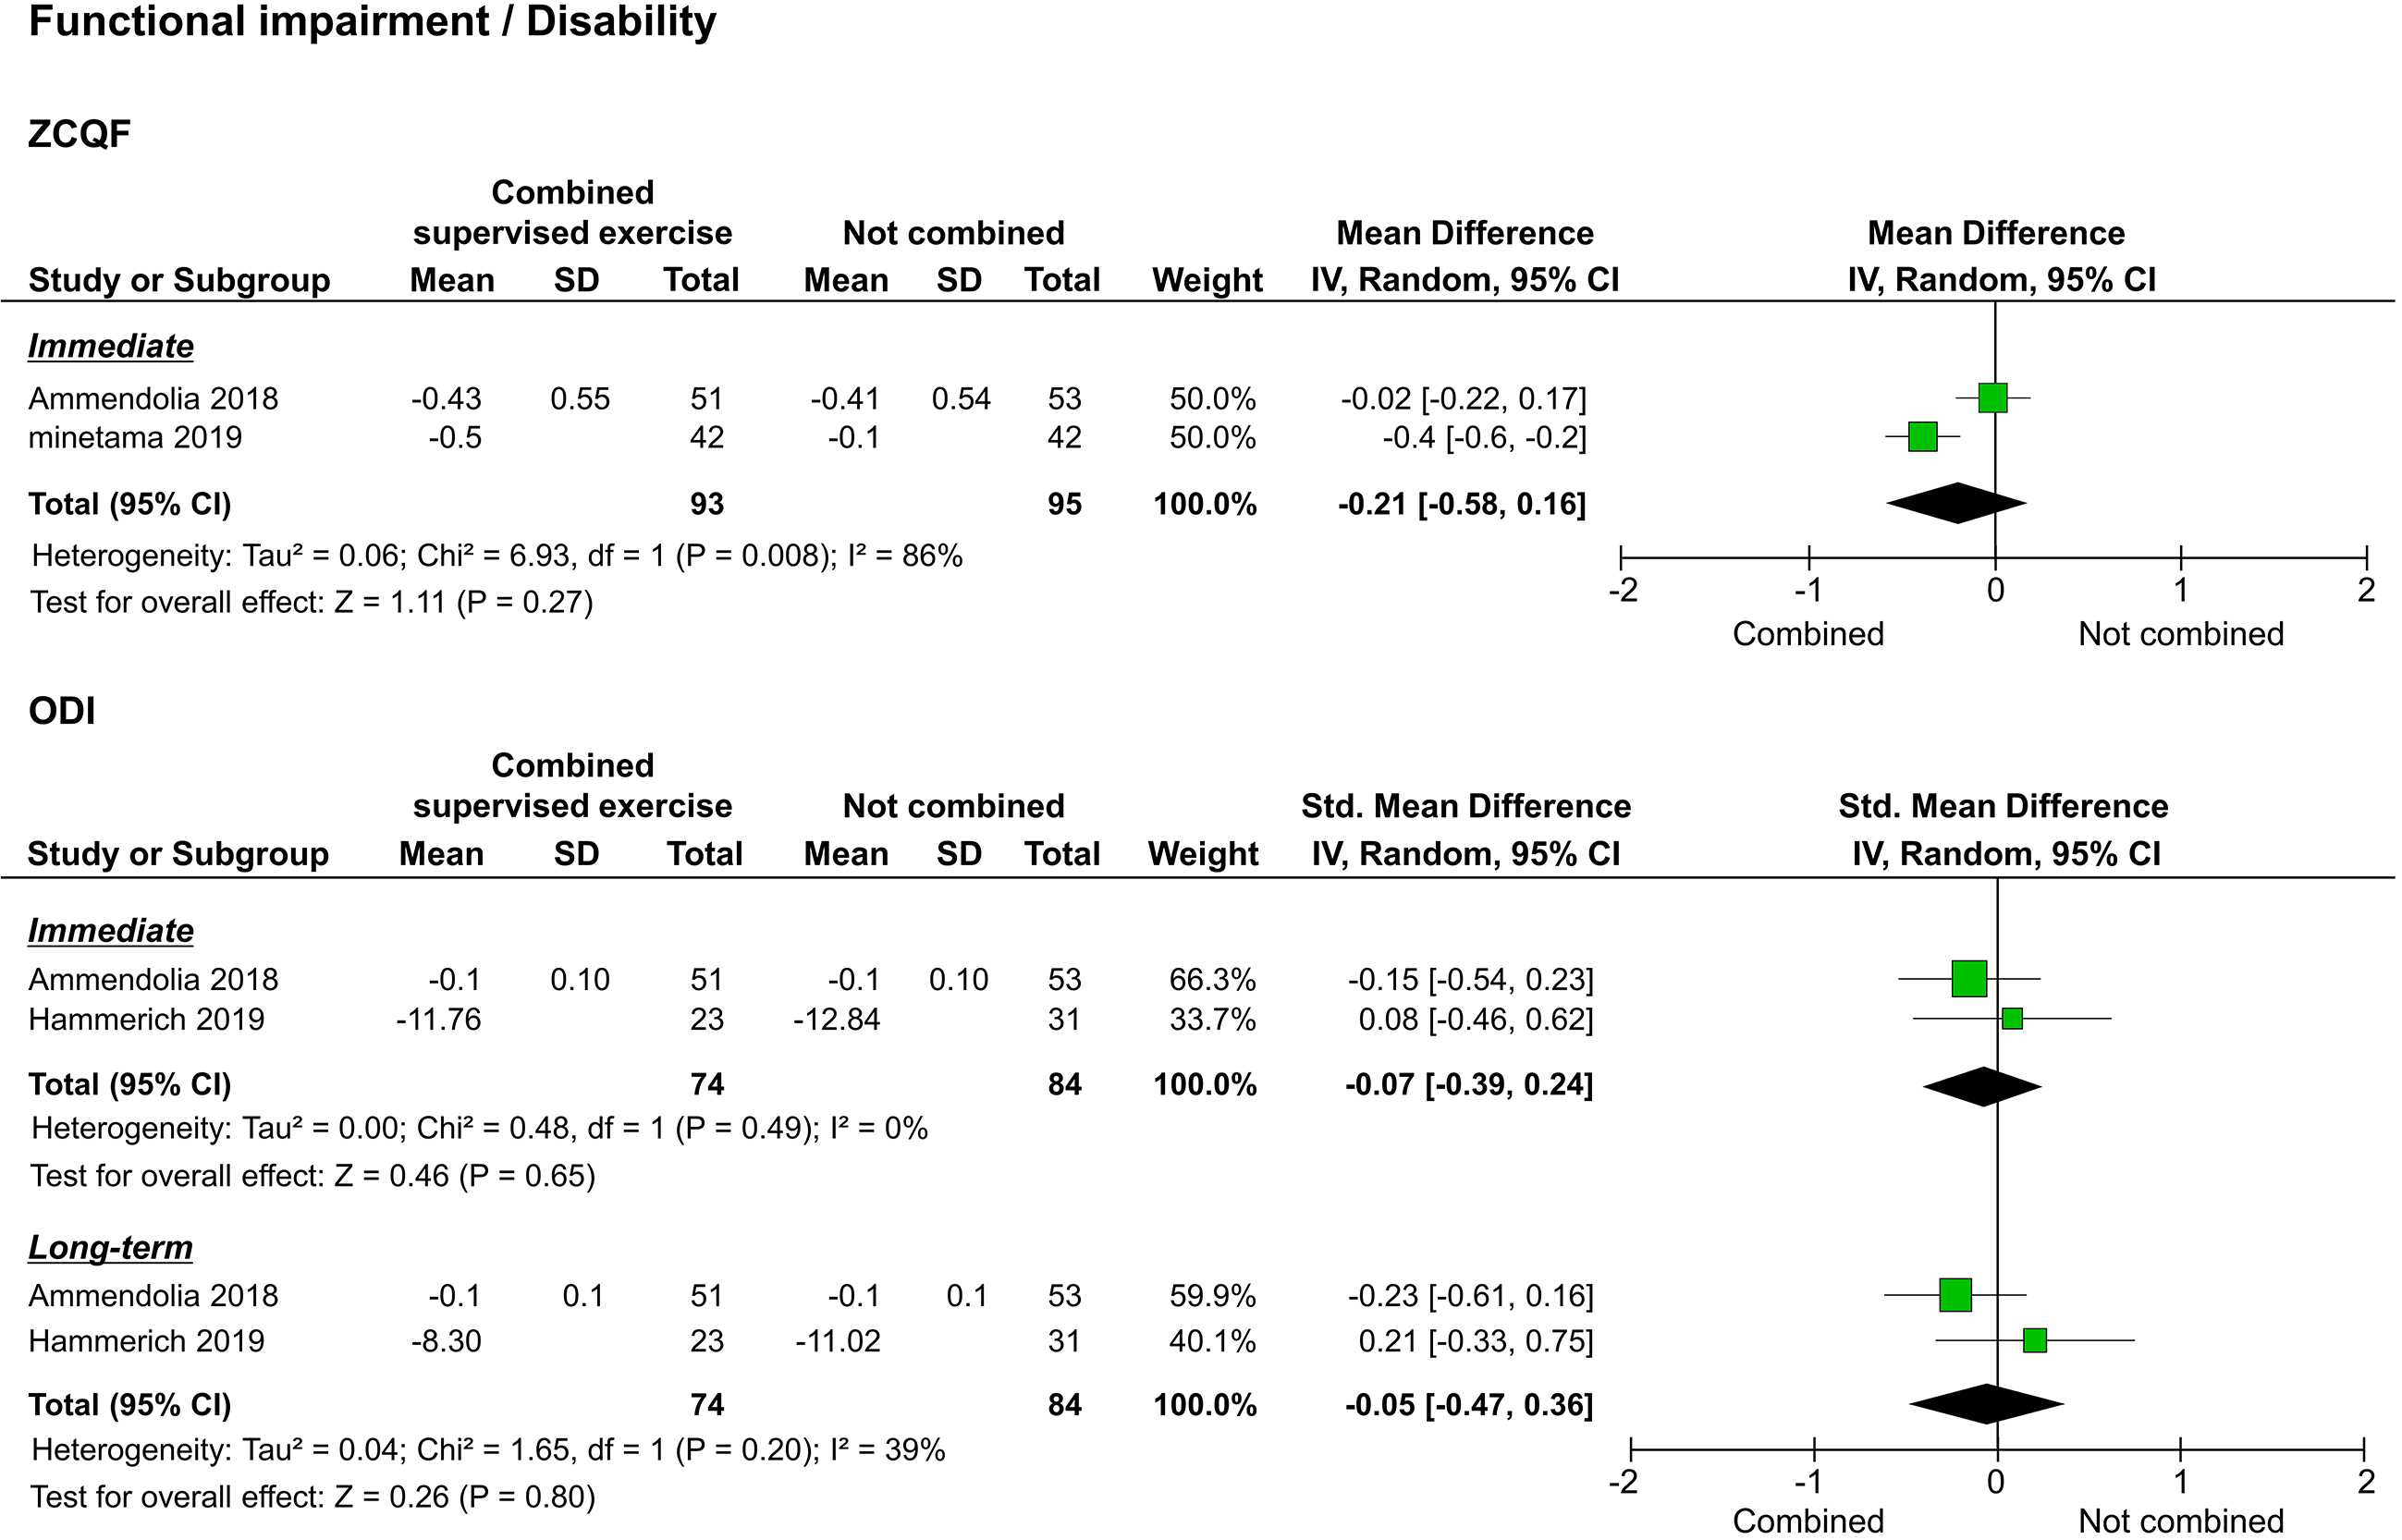 Forest plots of functional impairment/disability. Abbreviation. ZCQF, physical function domain of the Zurich claudication questionnaire; ODI: Oswestry disability index.